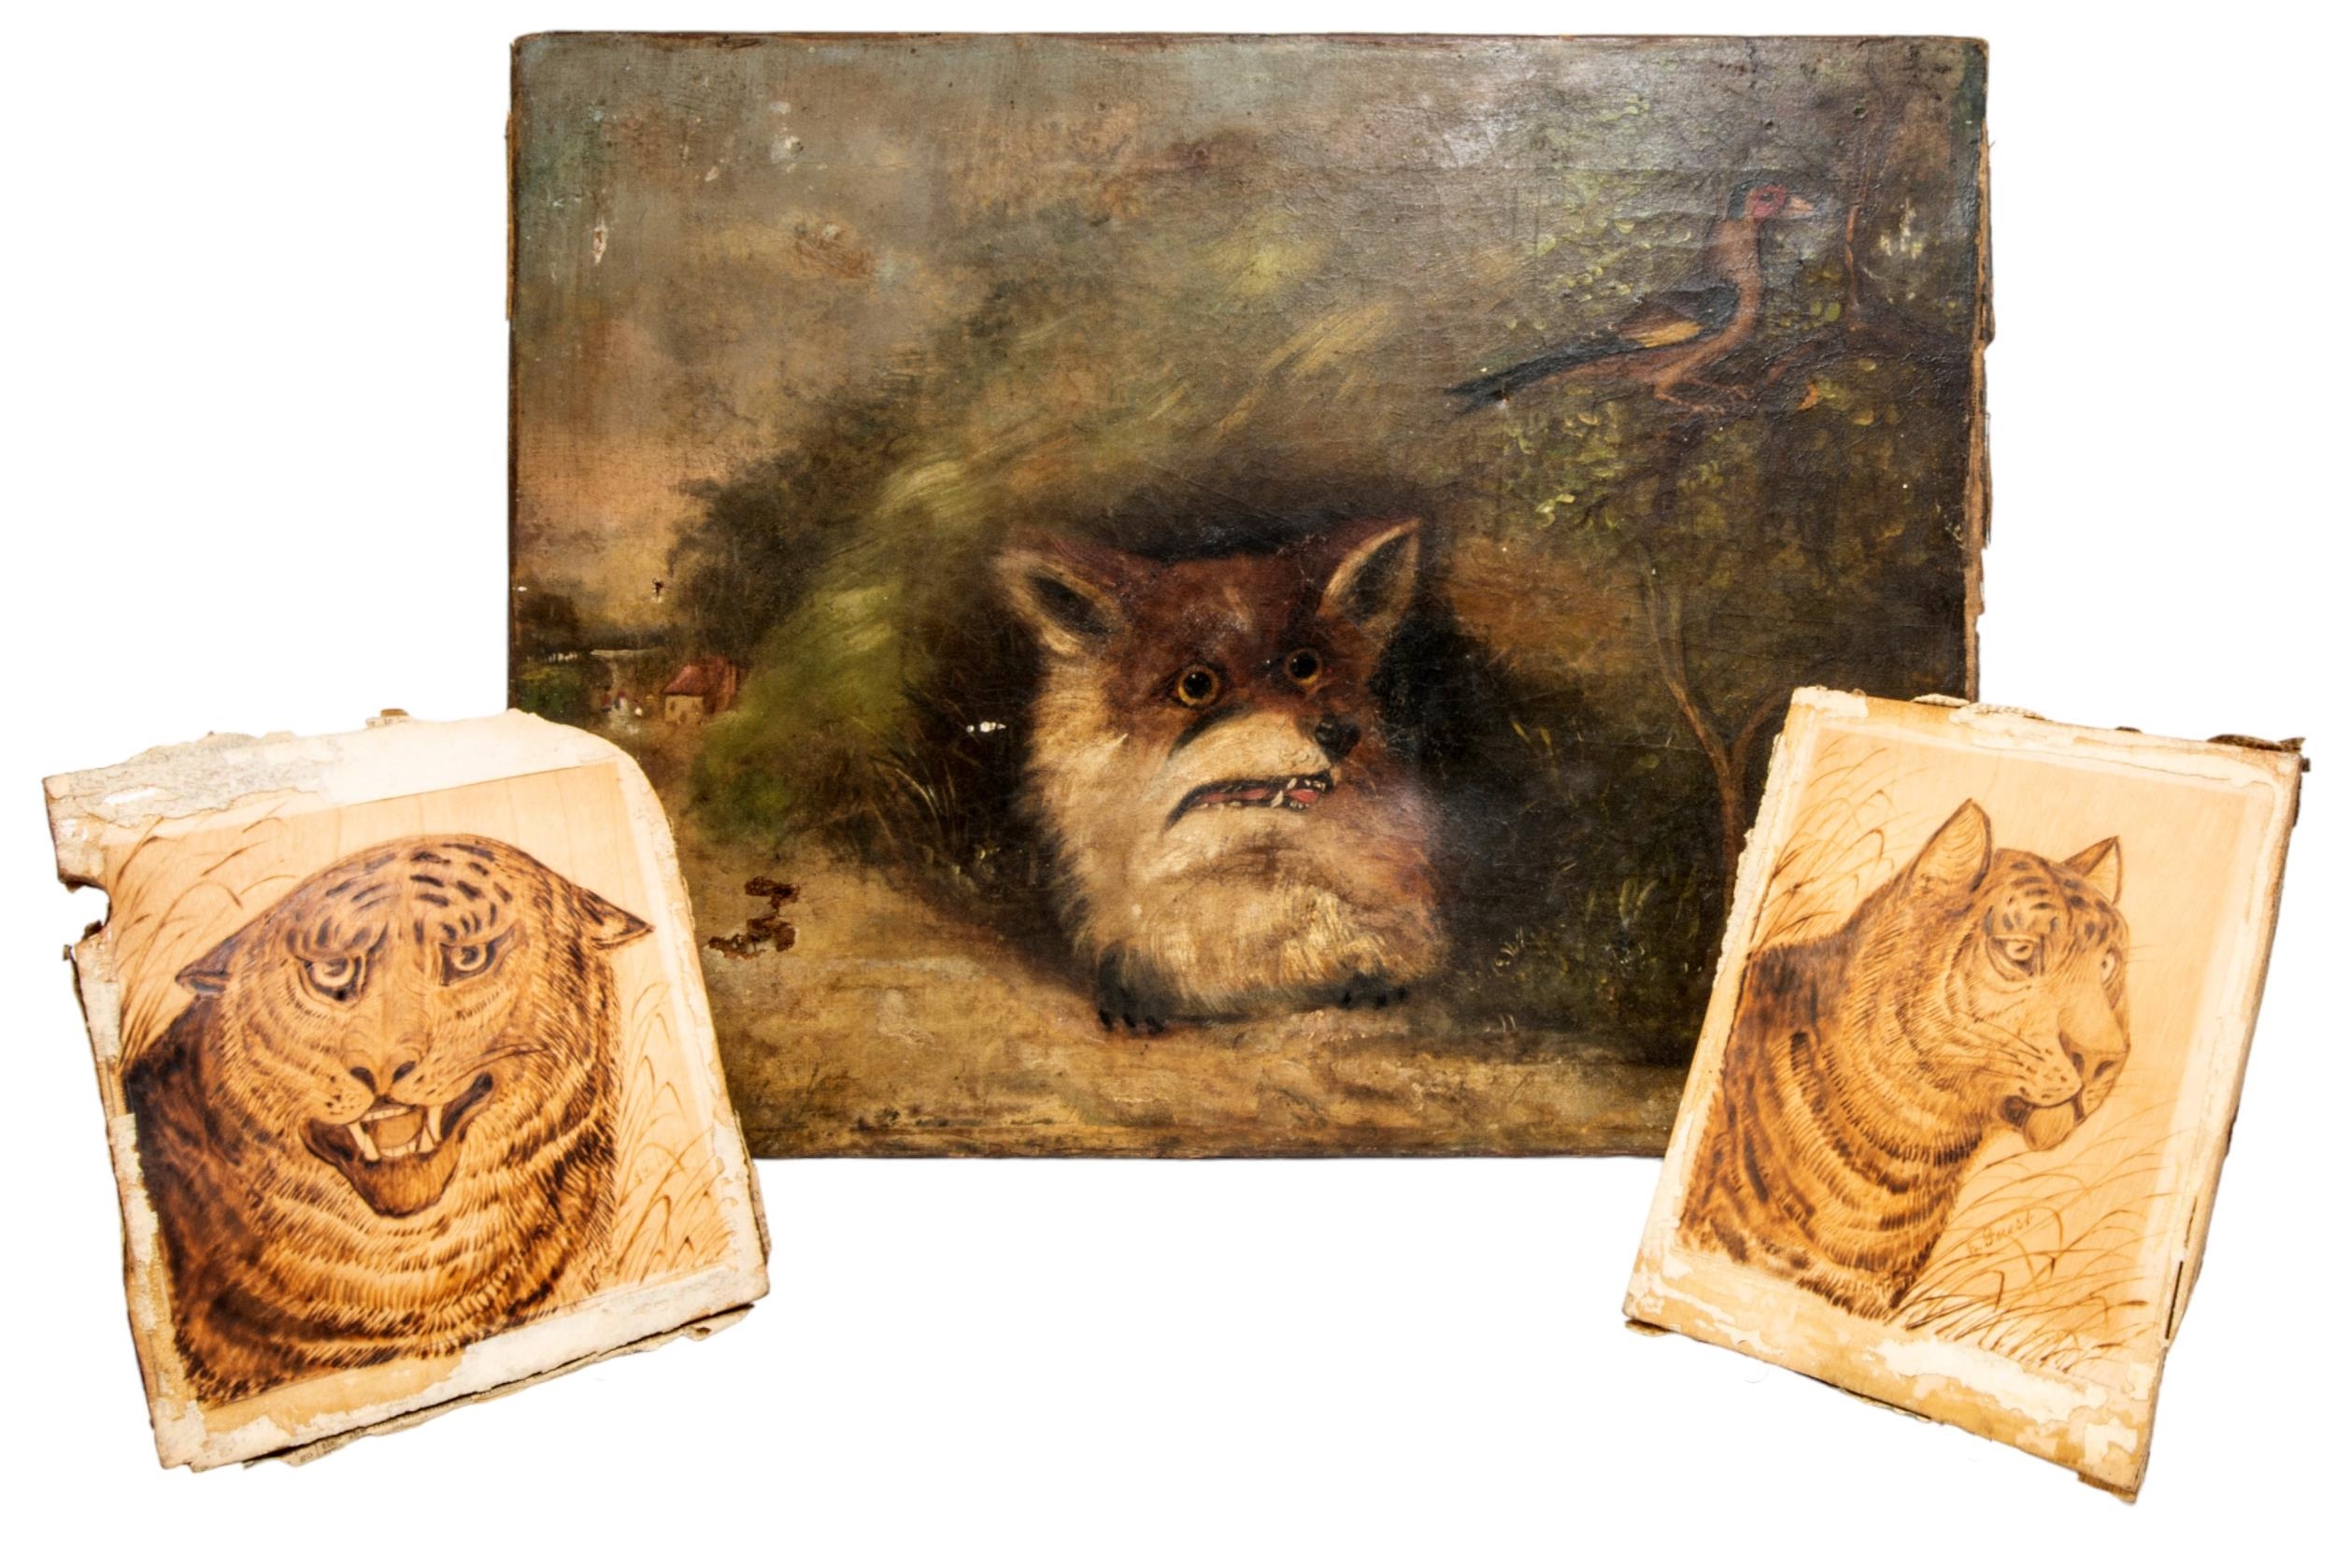 A PAIR OF NAIVE POKERWORK PANELS, both depicting a tiger in long grass, signed and inscribed 'Edward